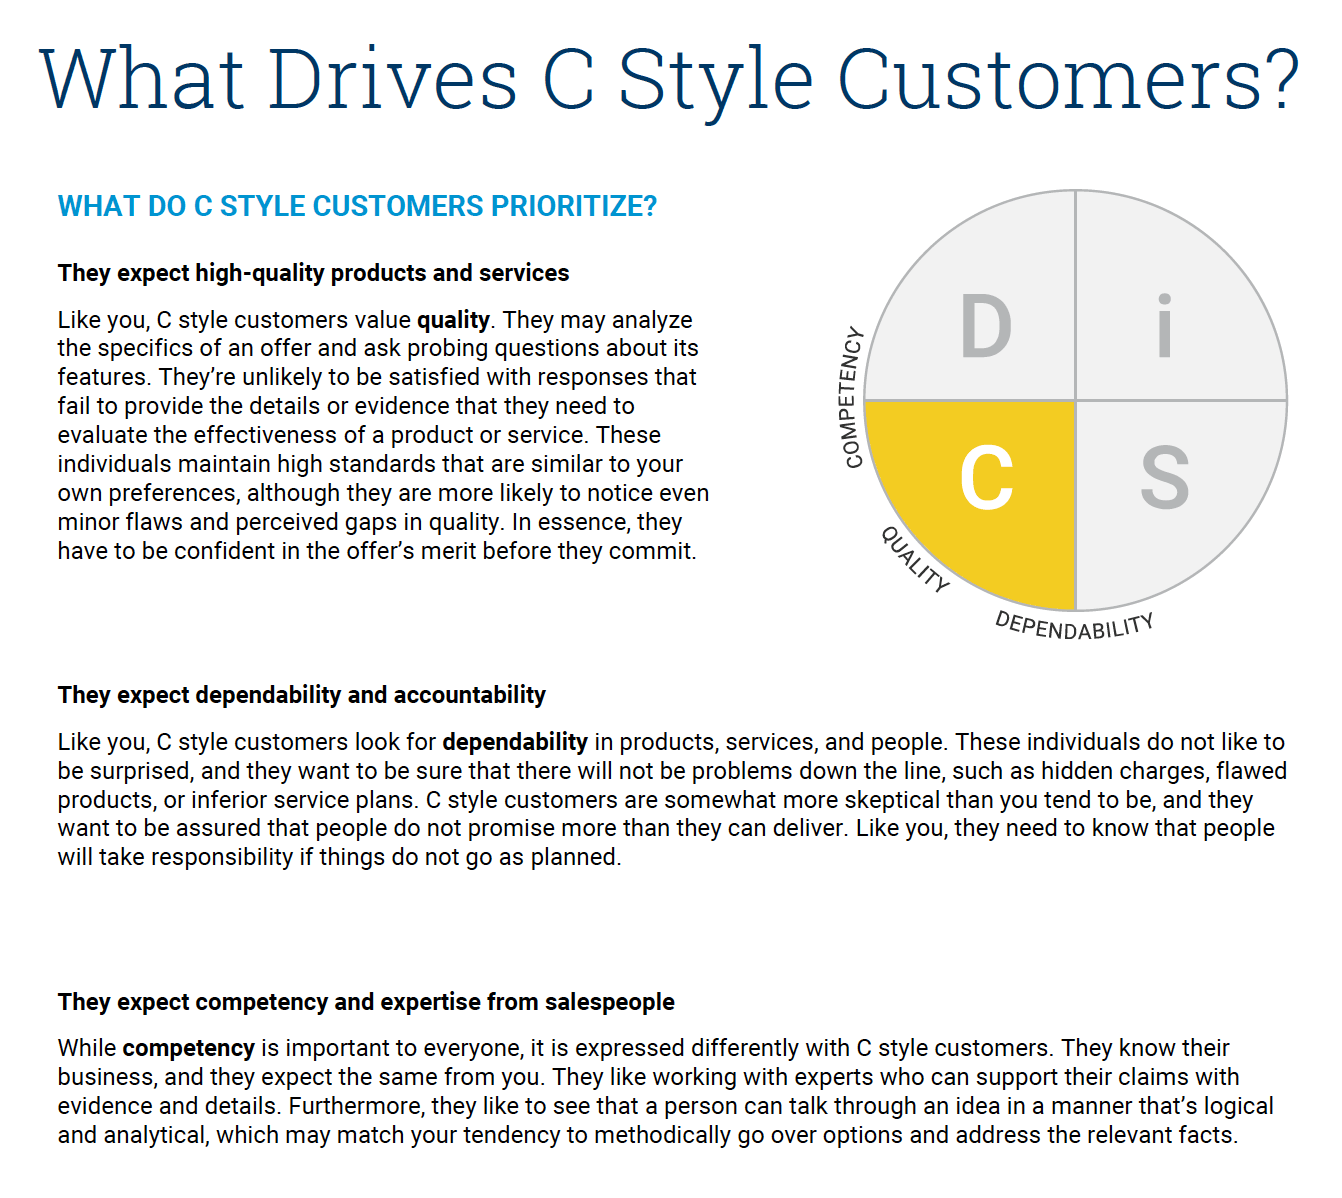 What Drives C-style Customers?